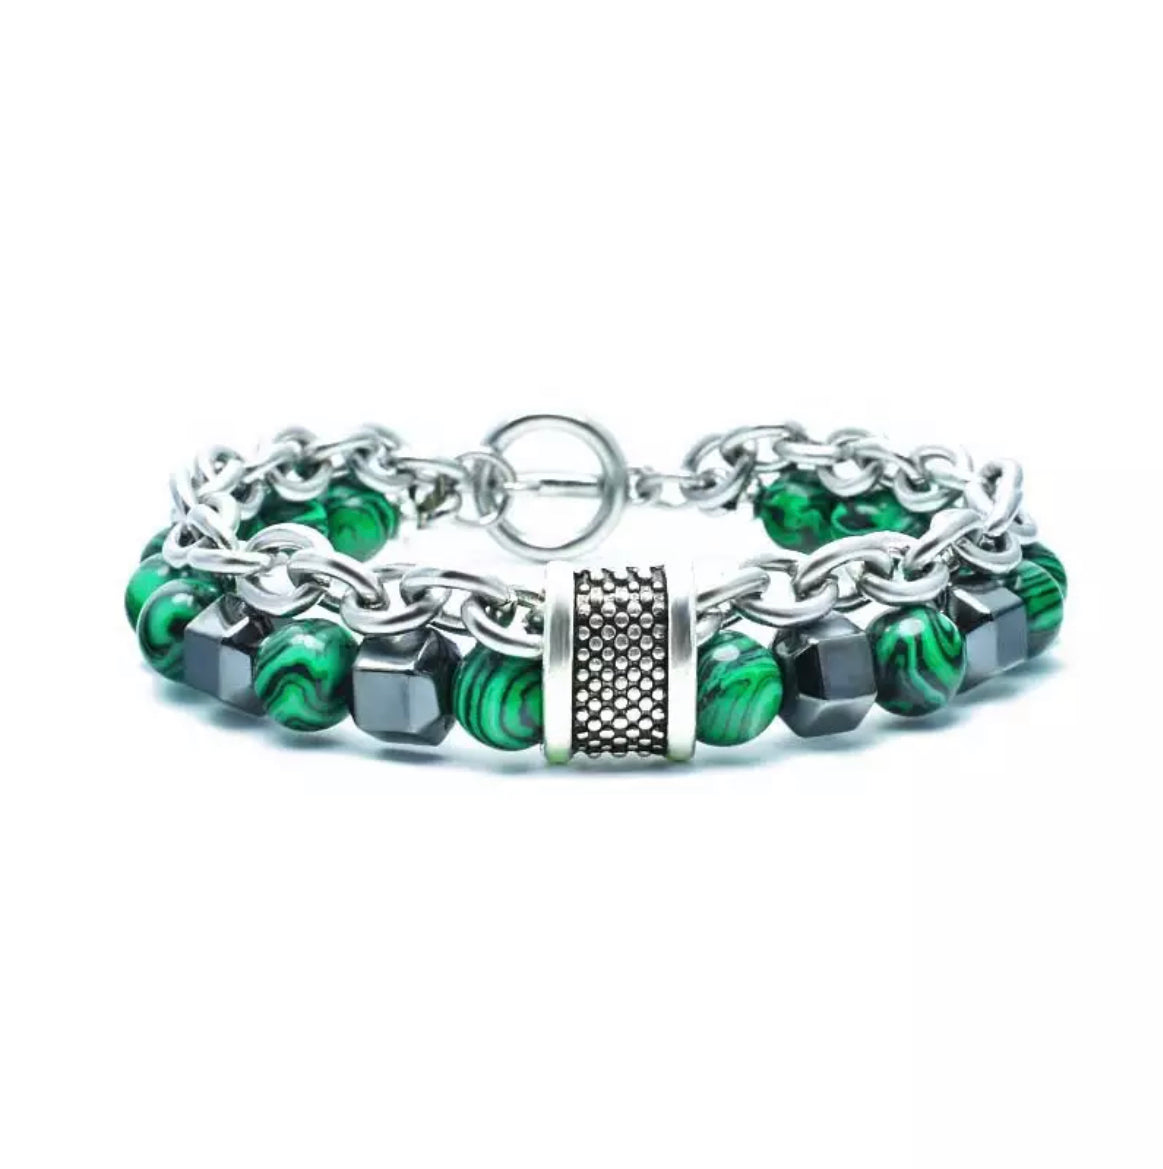 Green Stainless Steel Bracelet A (order NOW!!)